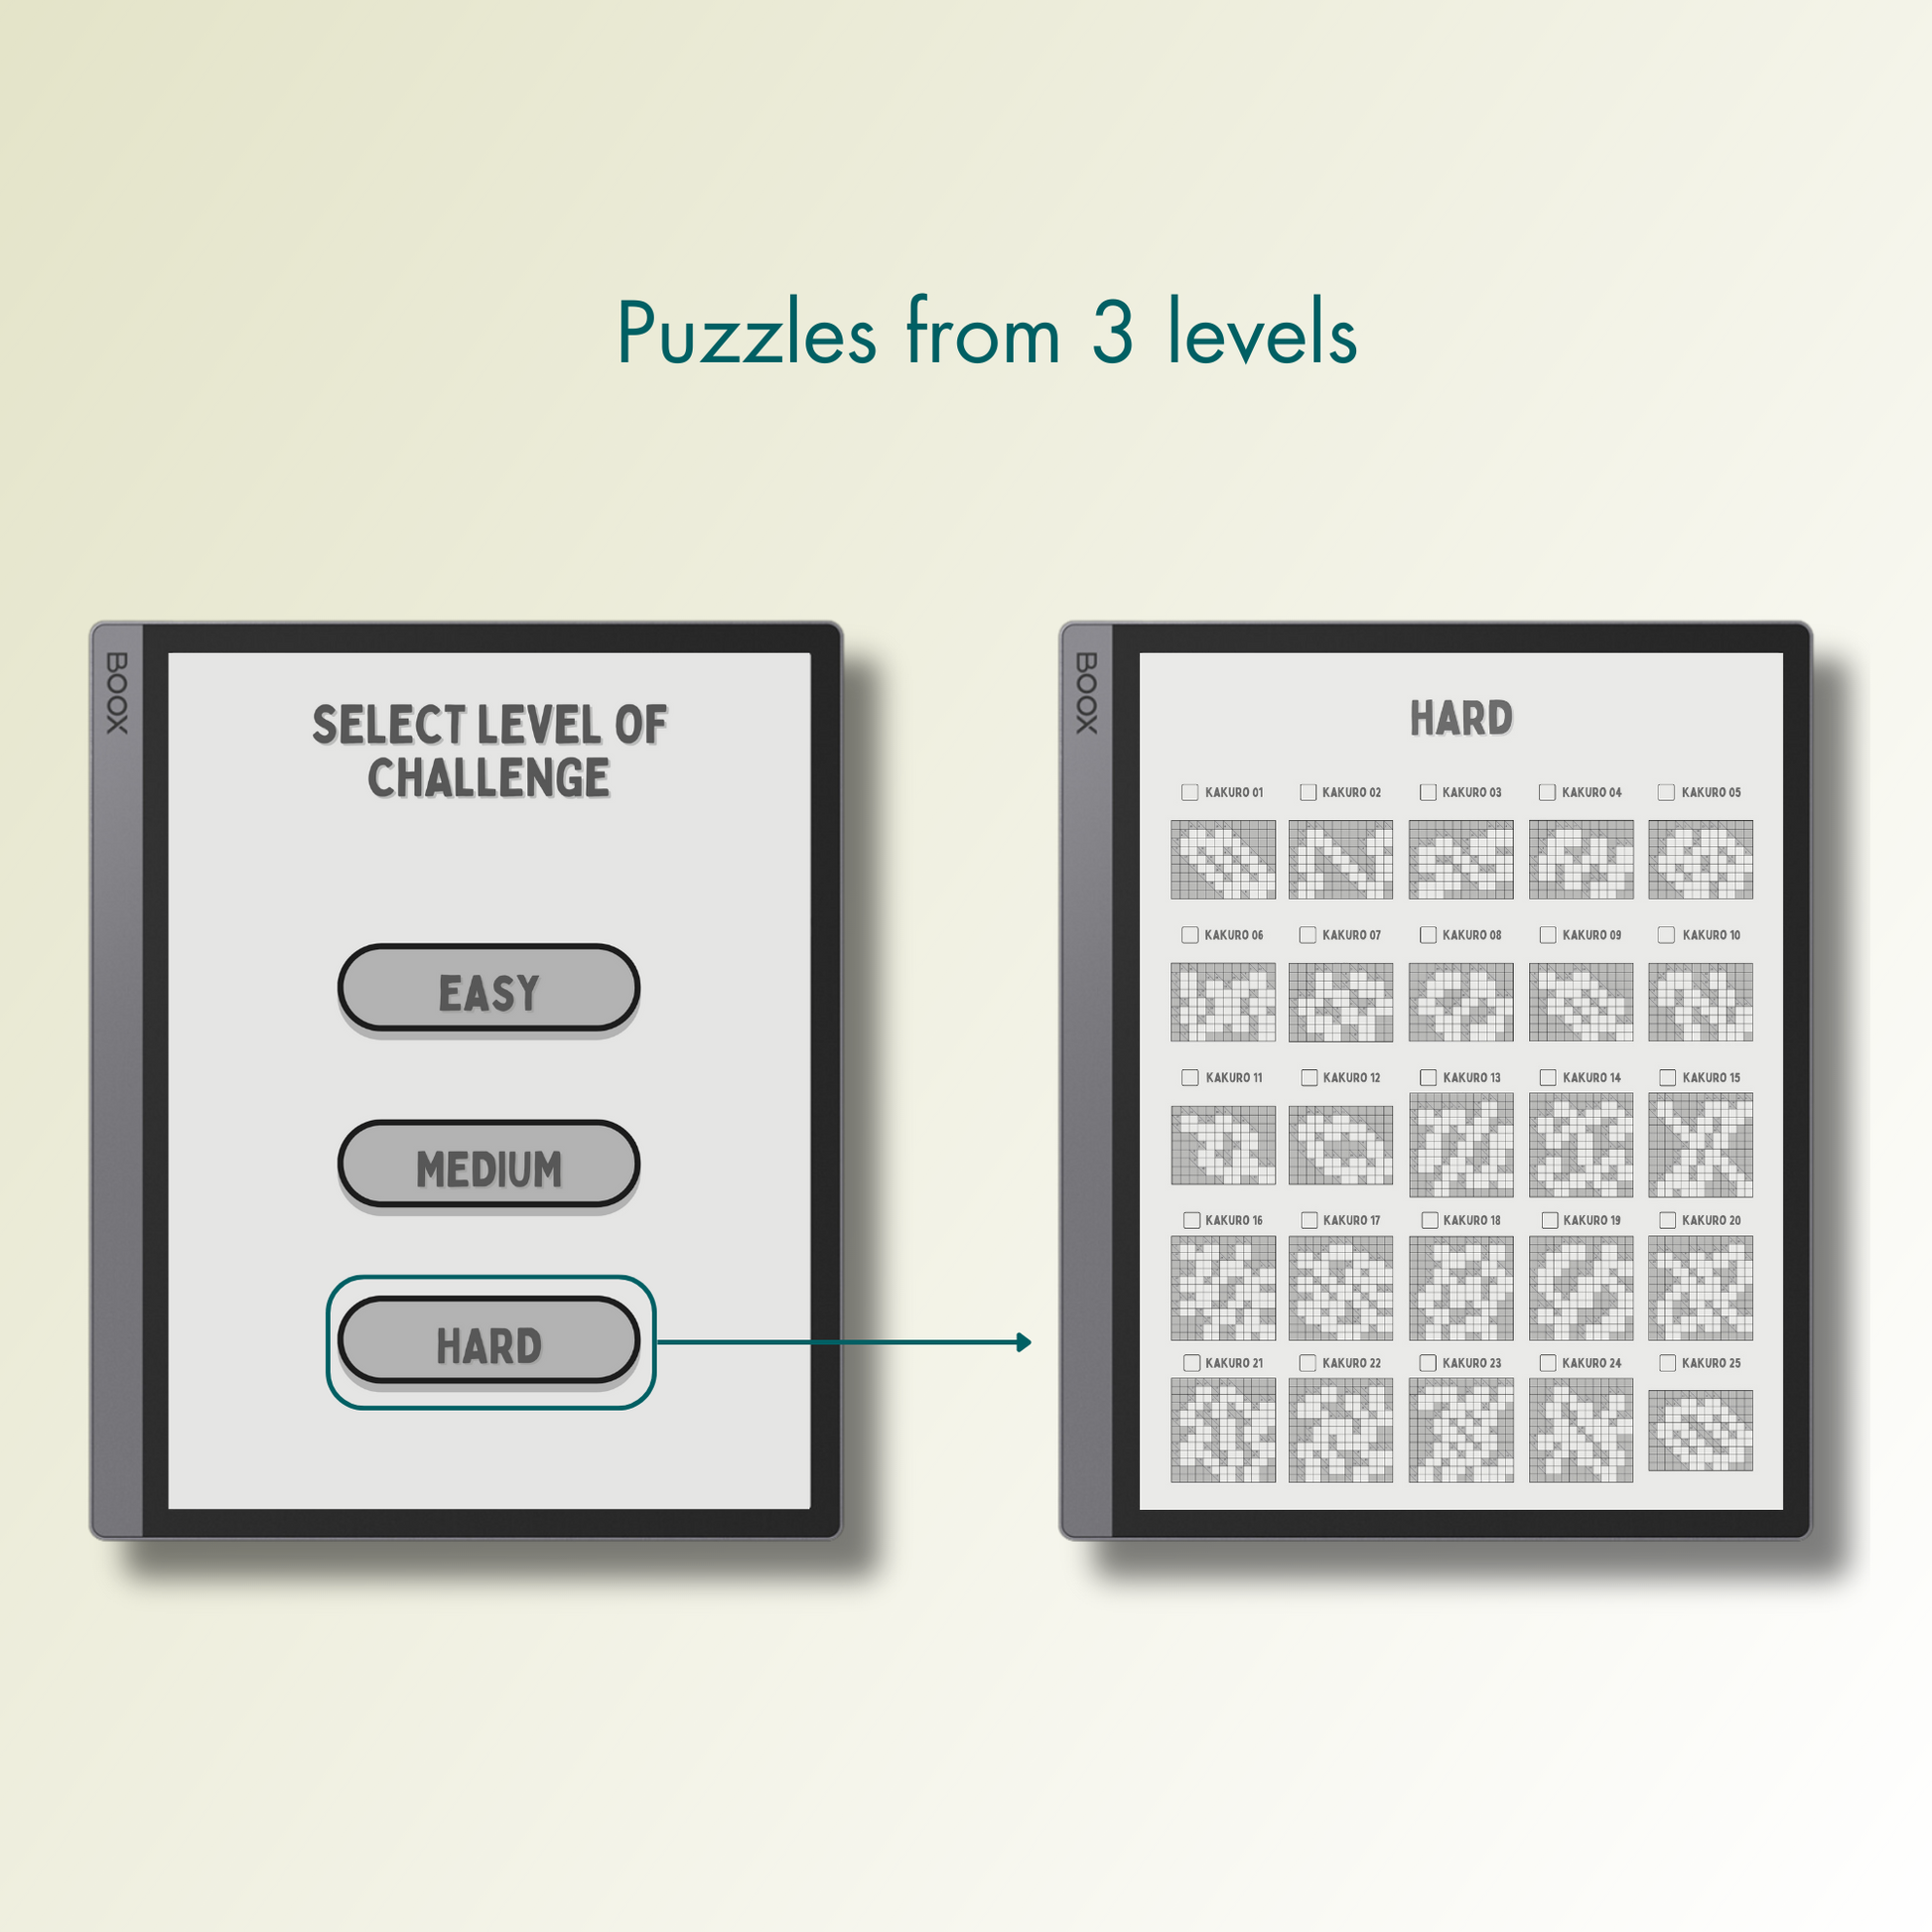 Onyx Boox Kakuro Puzzles in 3 different levels.